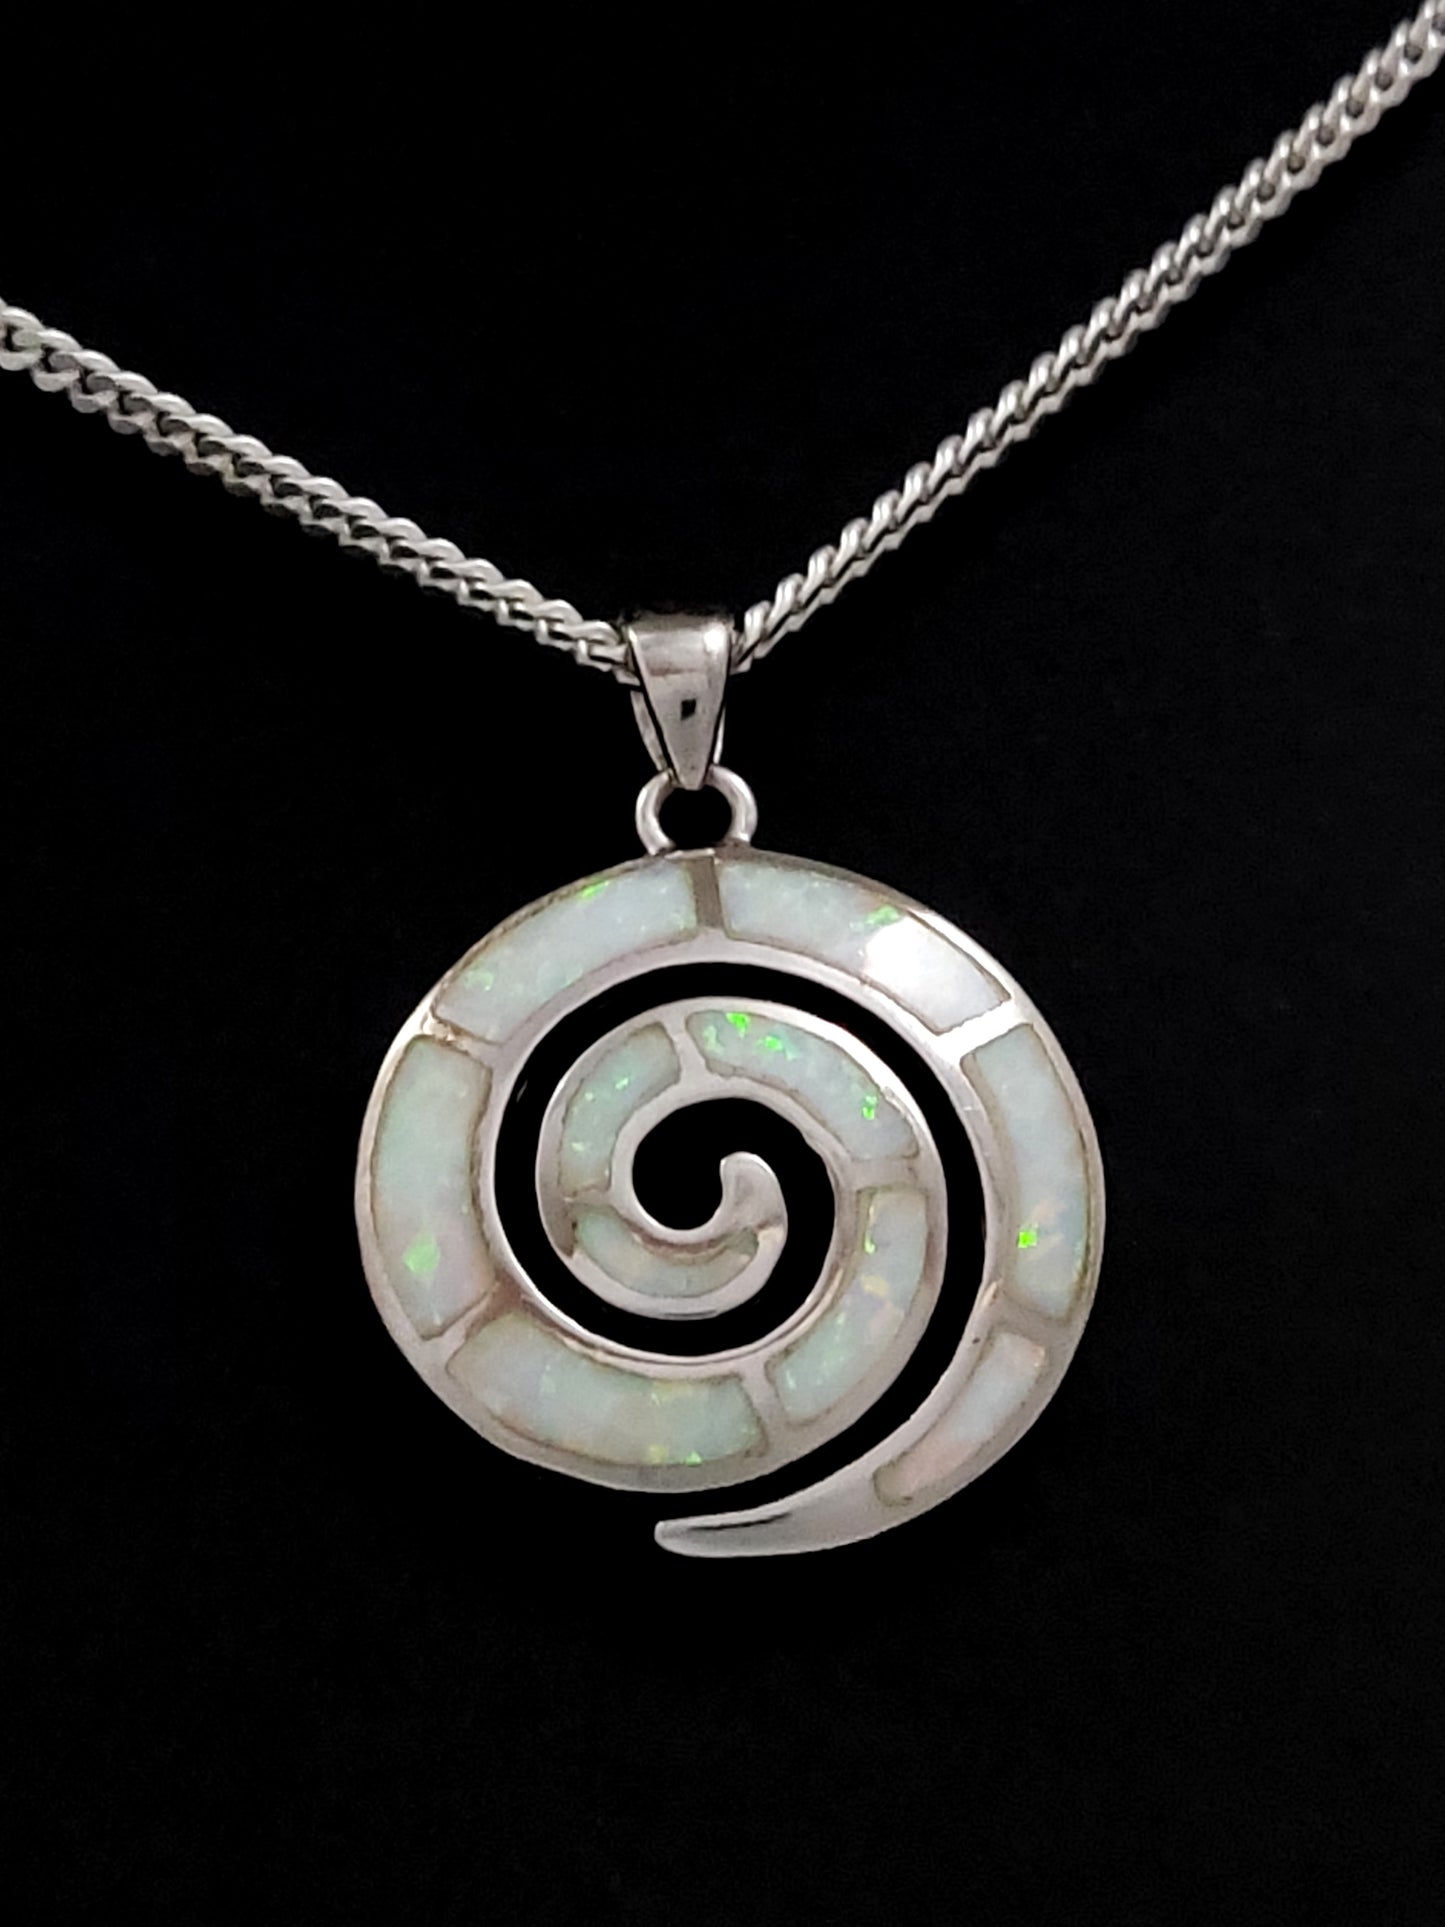 Greek silver spiral pendant with white opal stones measuring 23mm and with optional silver chain.